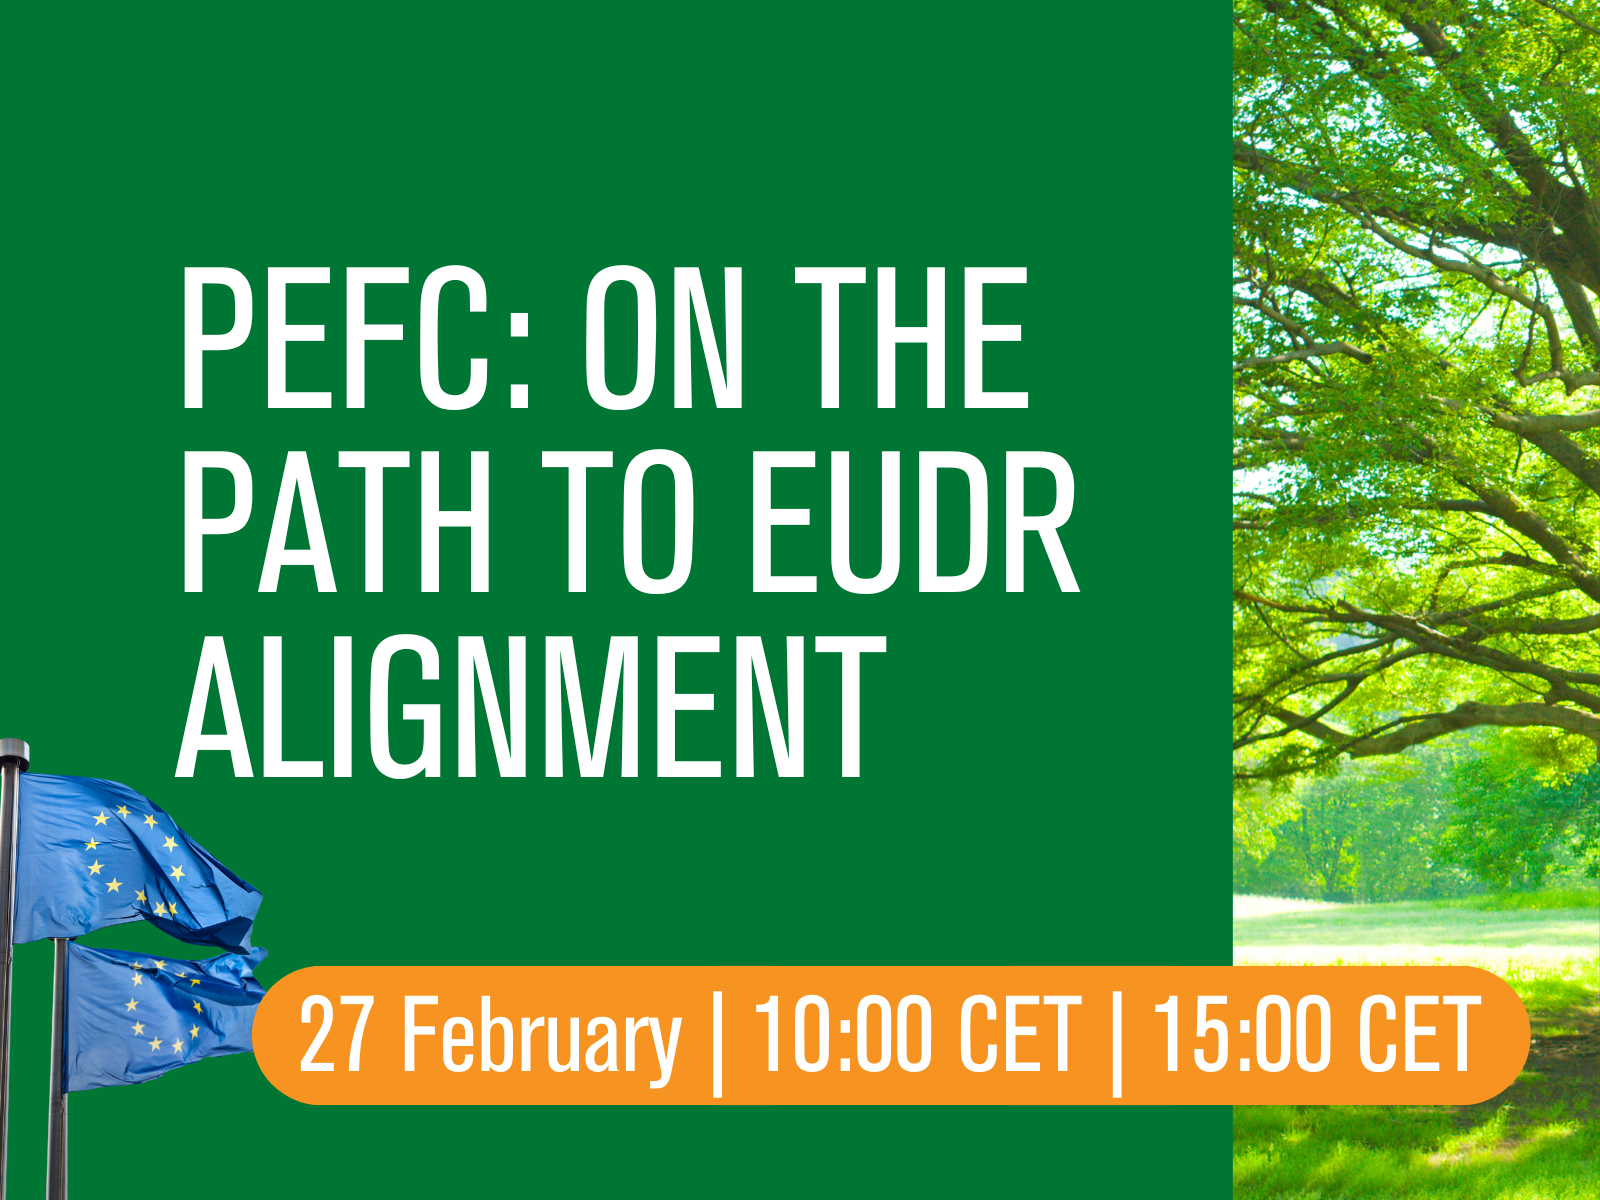 PEFC-on-the-path-to-EUDR